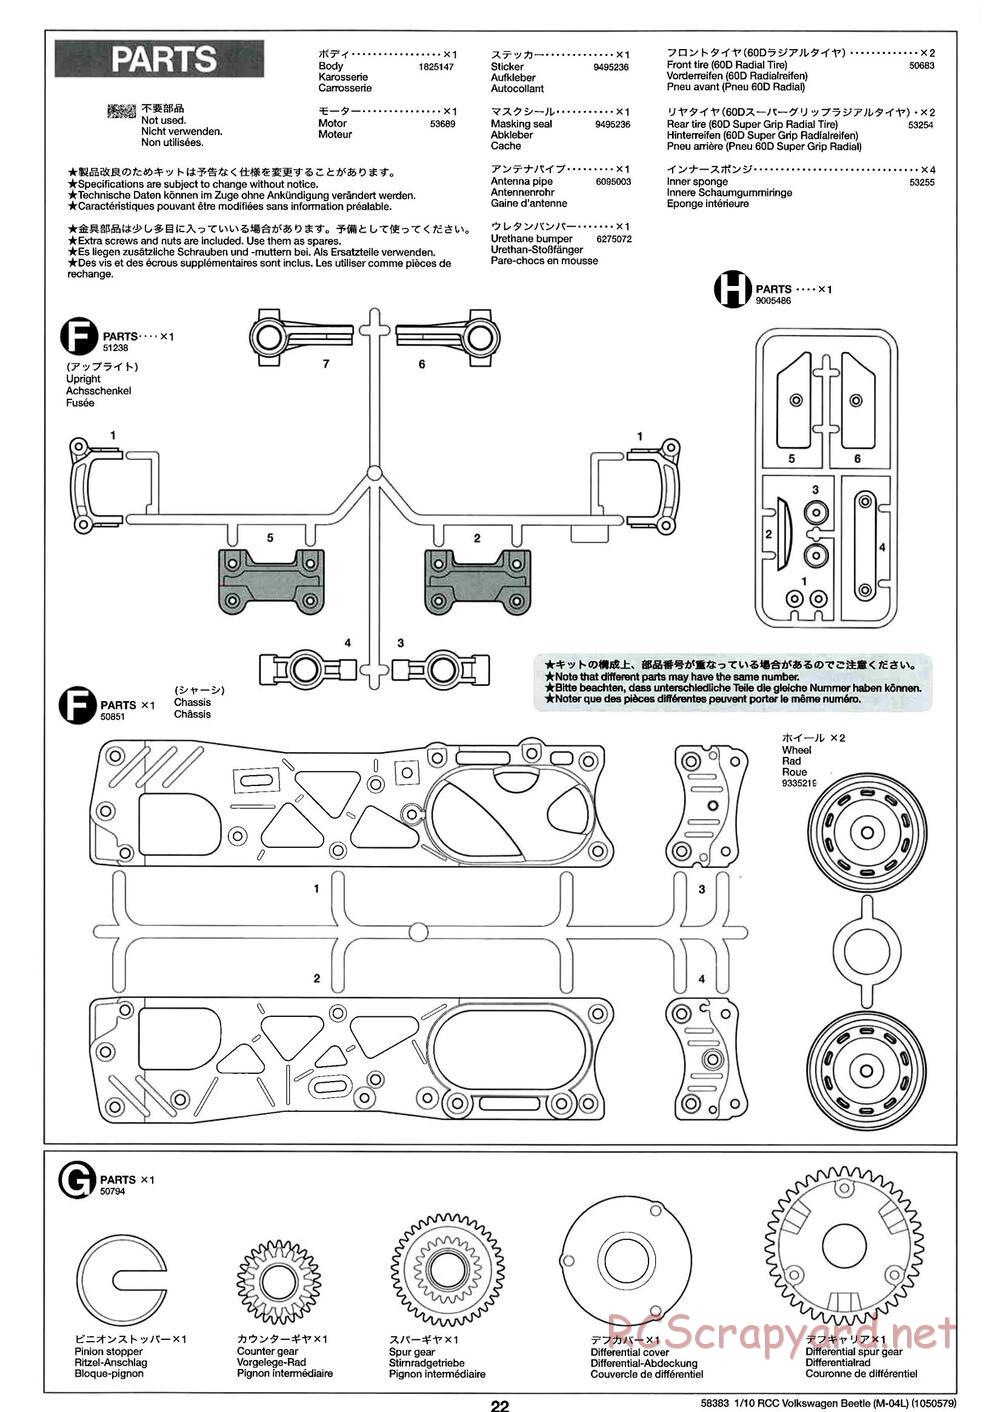 Tamiya - Volkswagen Beetle - M04L Chassis - Manual - Page 22